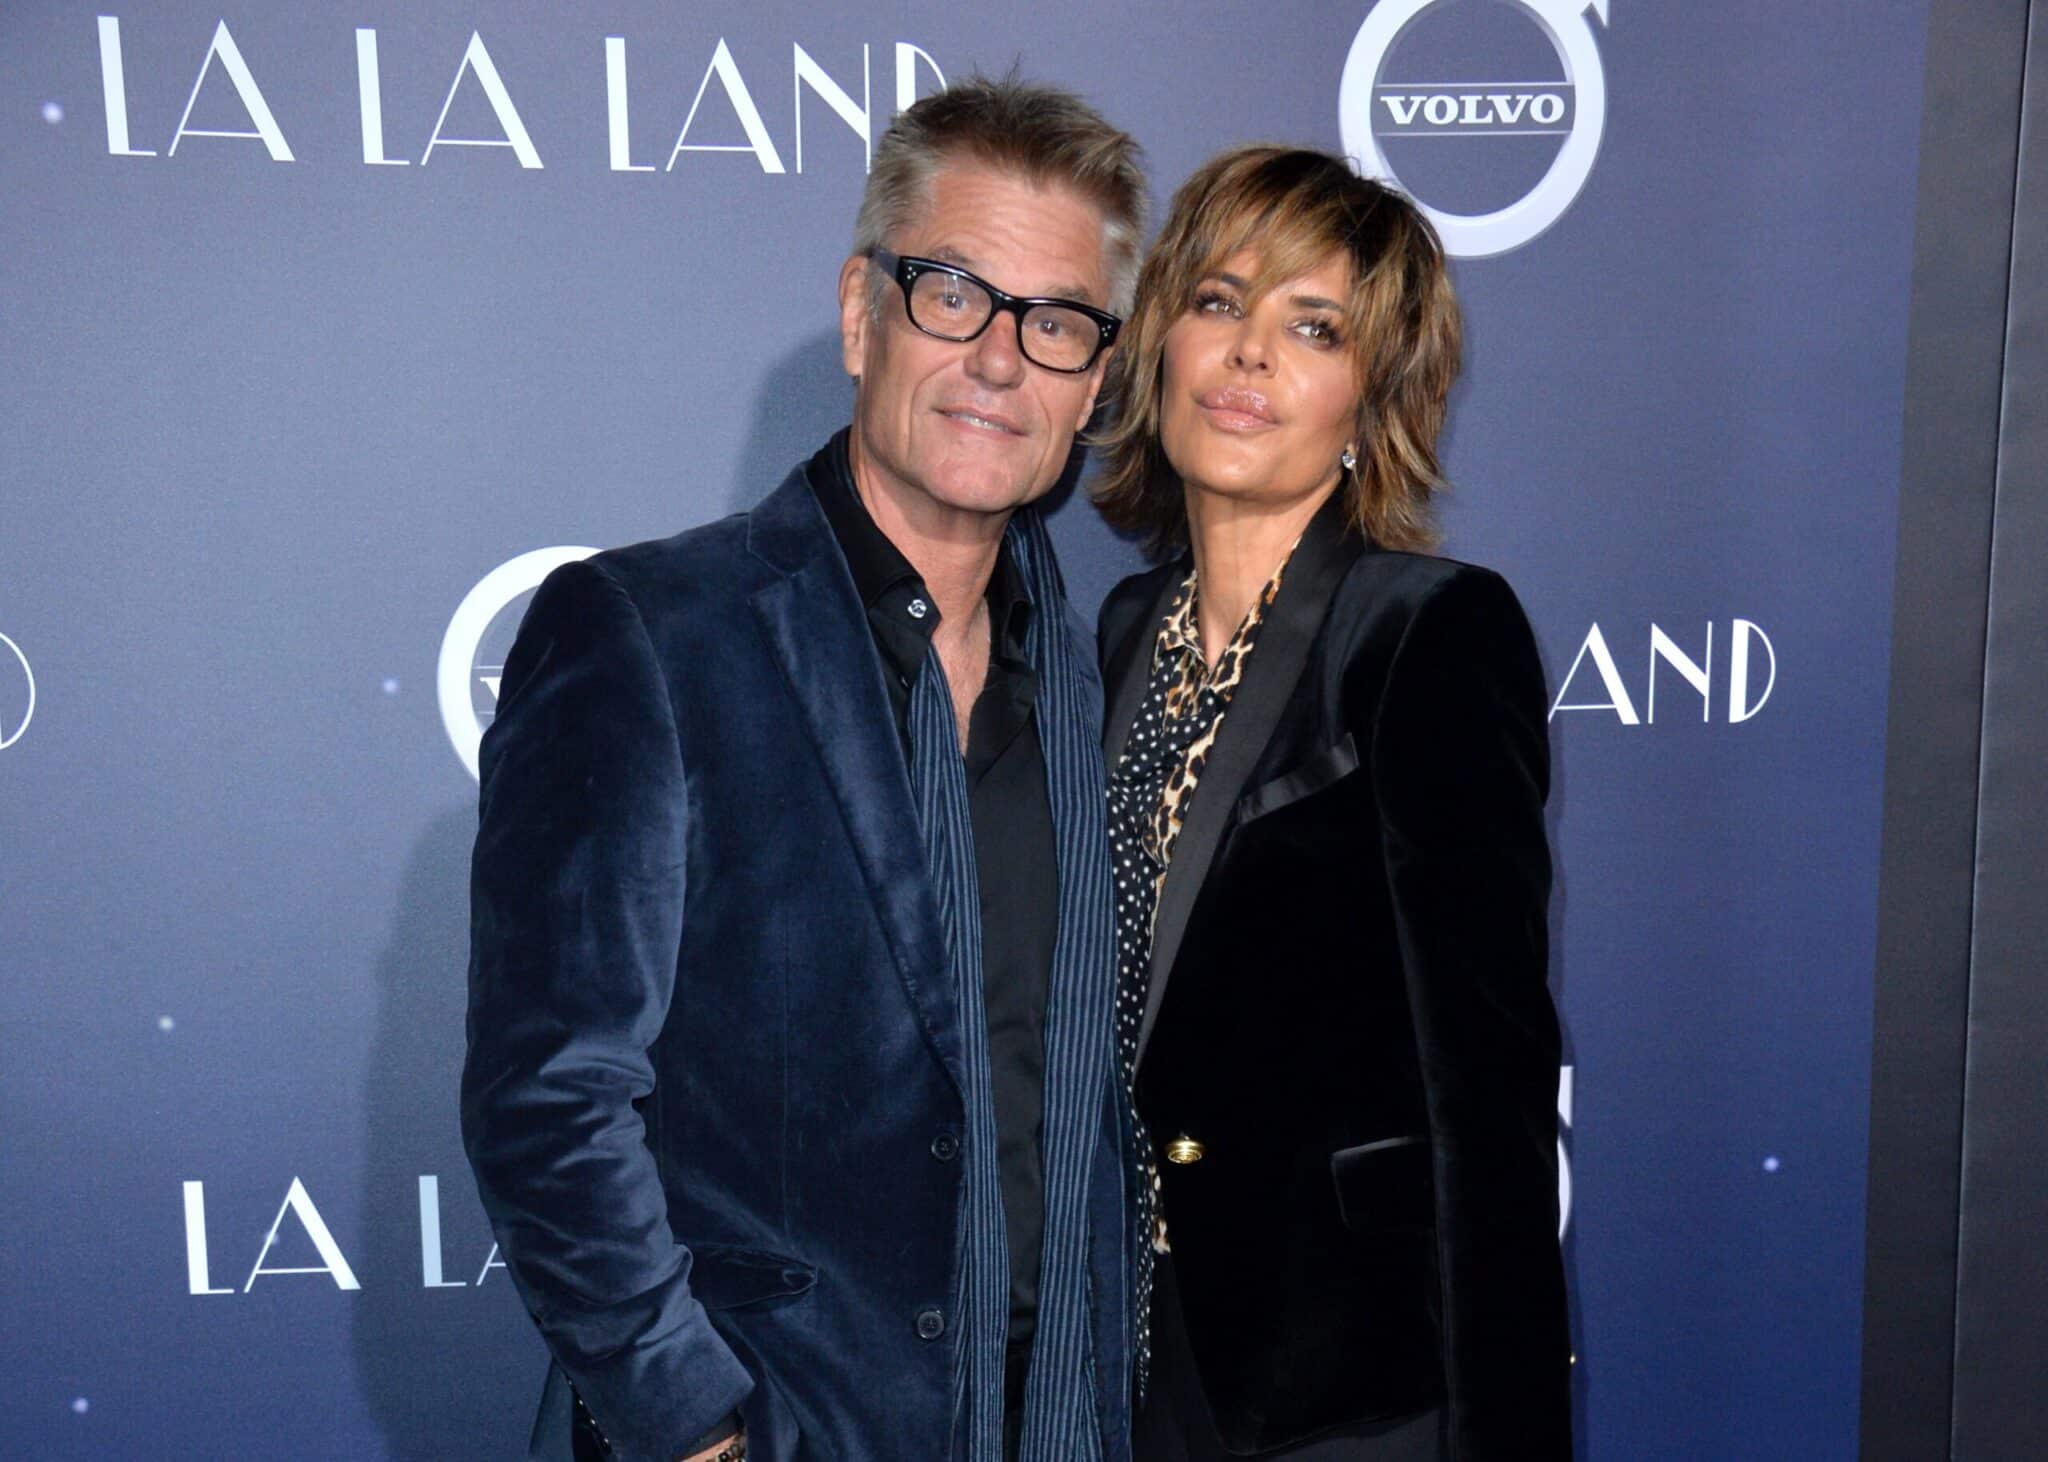 Watch There's Something to Those Rumors about Lisa Rinna's